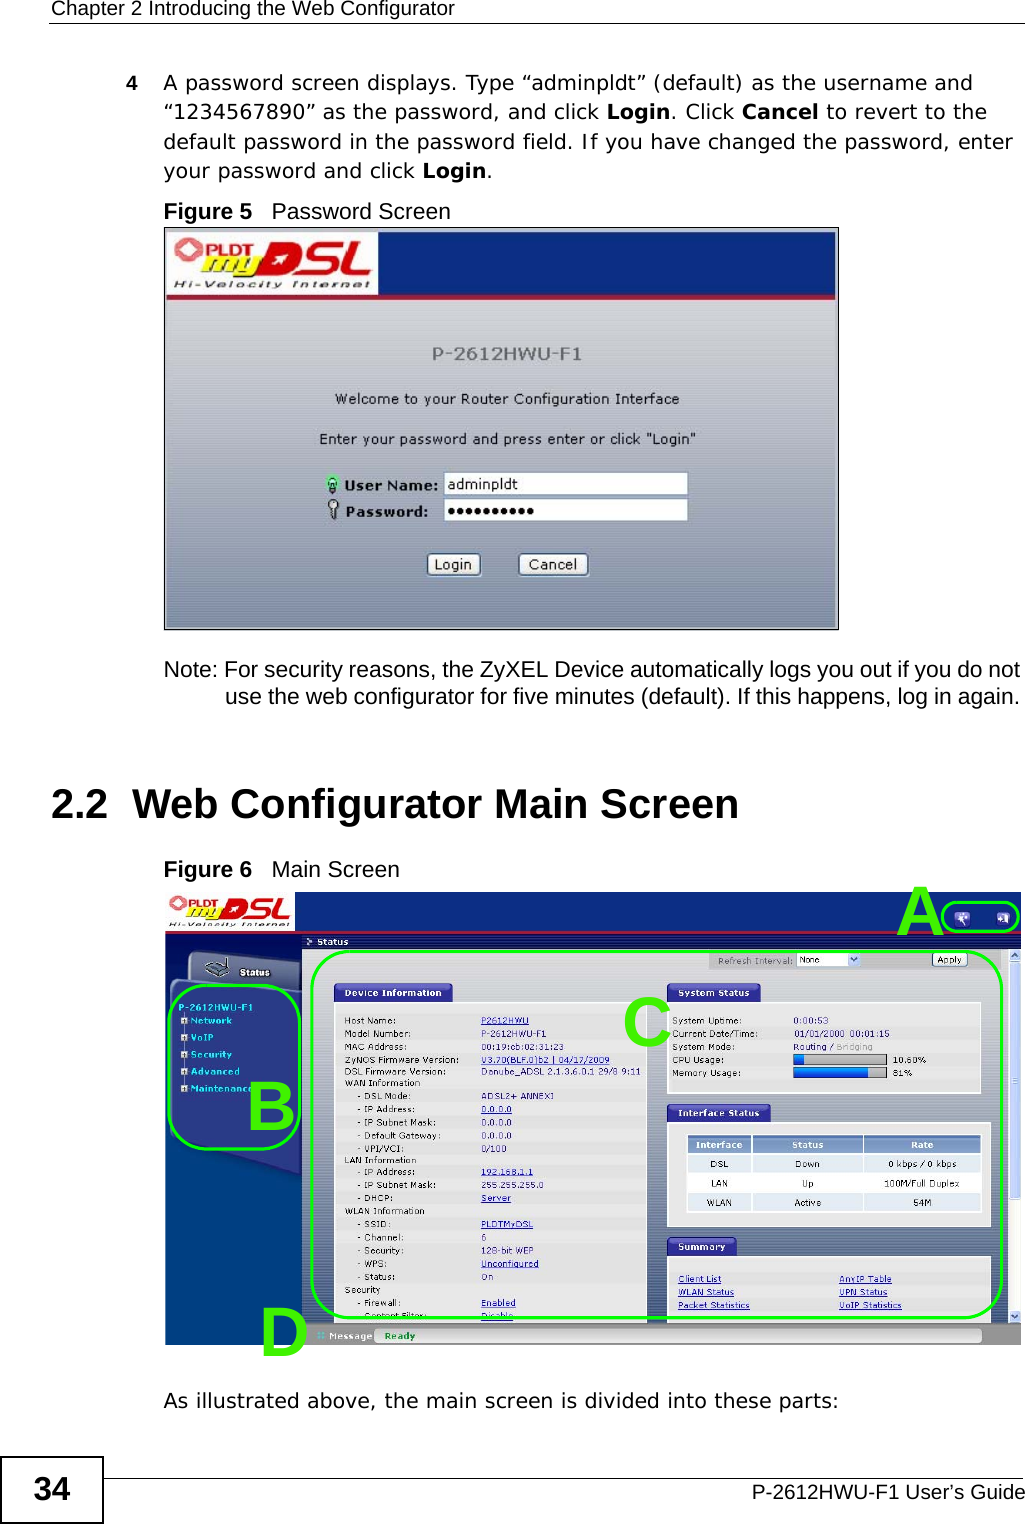 Chapter 2 Introducing the Web ConfiguratorP-2612HWU-F1 User’s Guide344A password screen displays. Type “adminpldt” (default) as the username and “1234567890” as the password, and click Login. Click Cancel to revert to the default password in the password field. If you have changed the password, enter your password and click Login. Figure 5   Password ScreenNote: For security reasons, the ZyXEL Device automatically logs you out if you do not use the web configurator for five minutes (default). If this happens, log in again. 2.2  Web Configurator Main ScreenFigure 6   Main ScreenAs illustrated above, the main screen is divided into these parts:ABCD